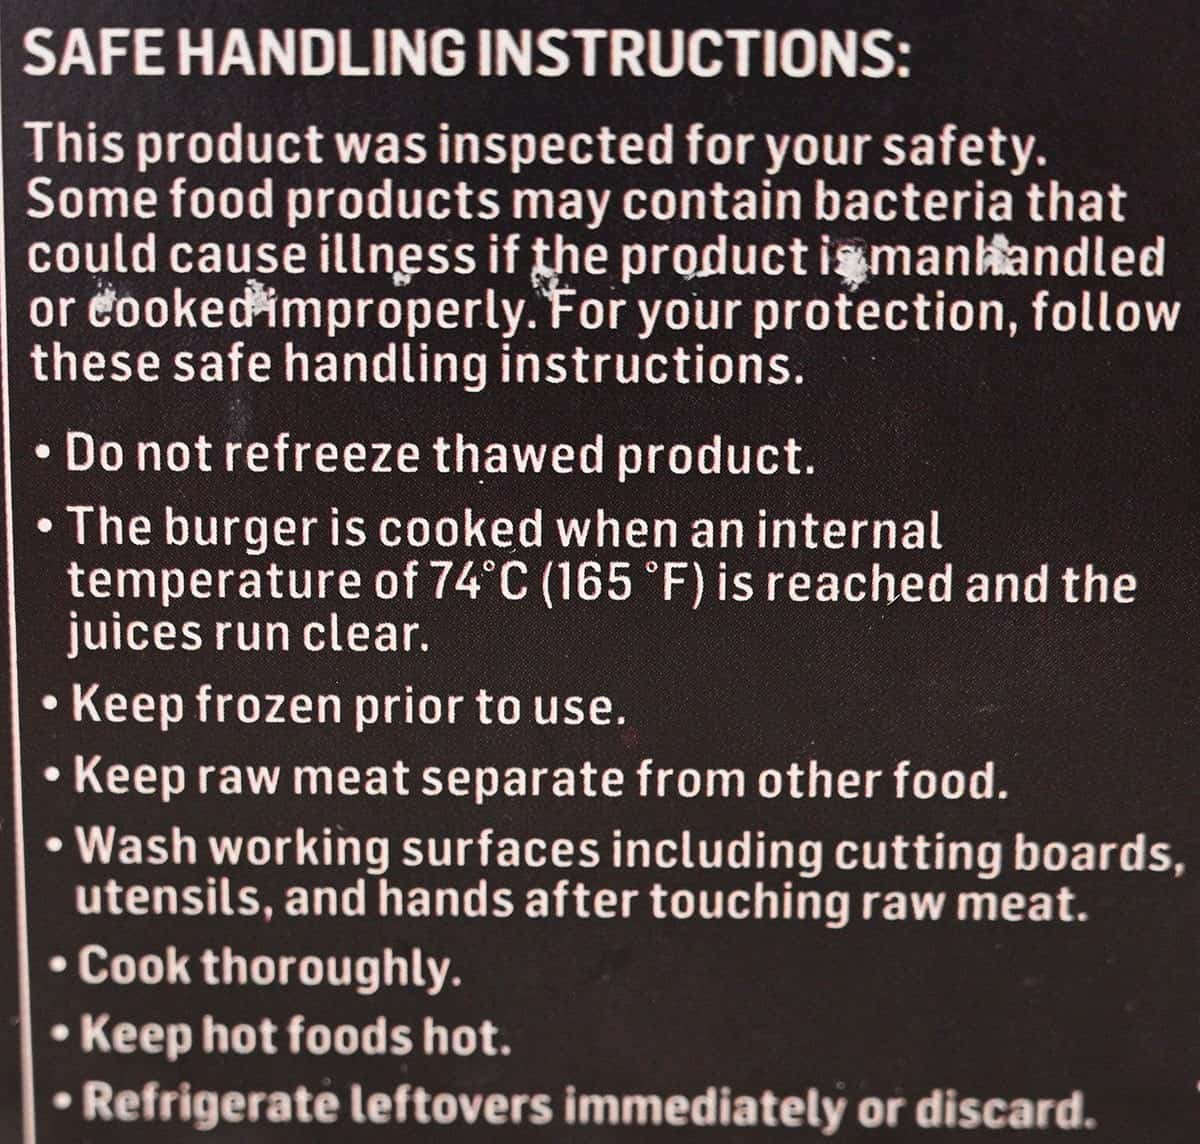 Image of safe handling instructions from box. 